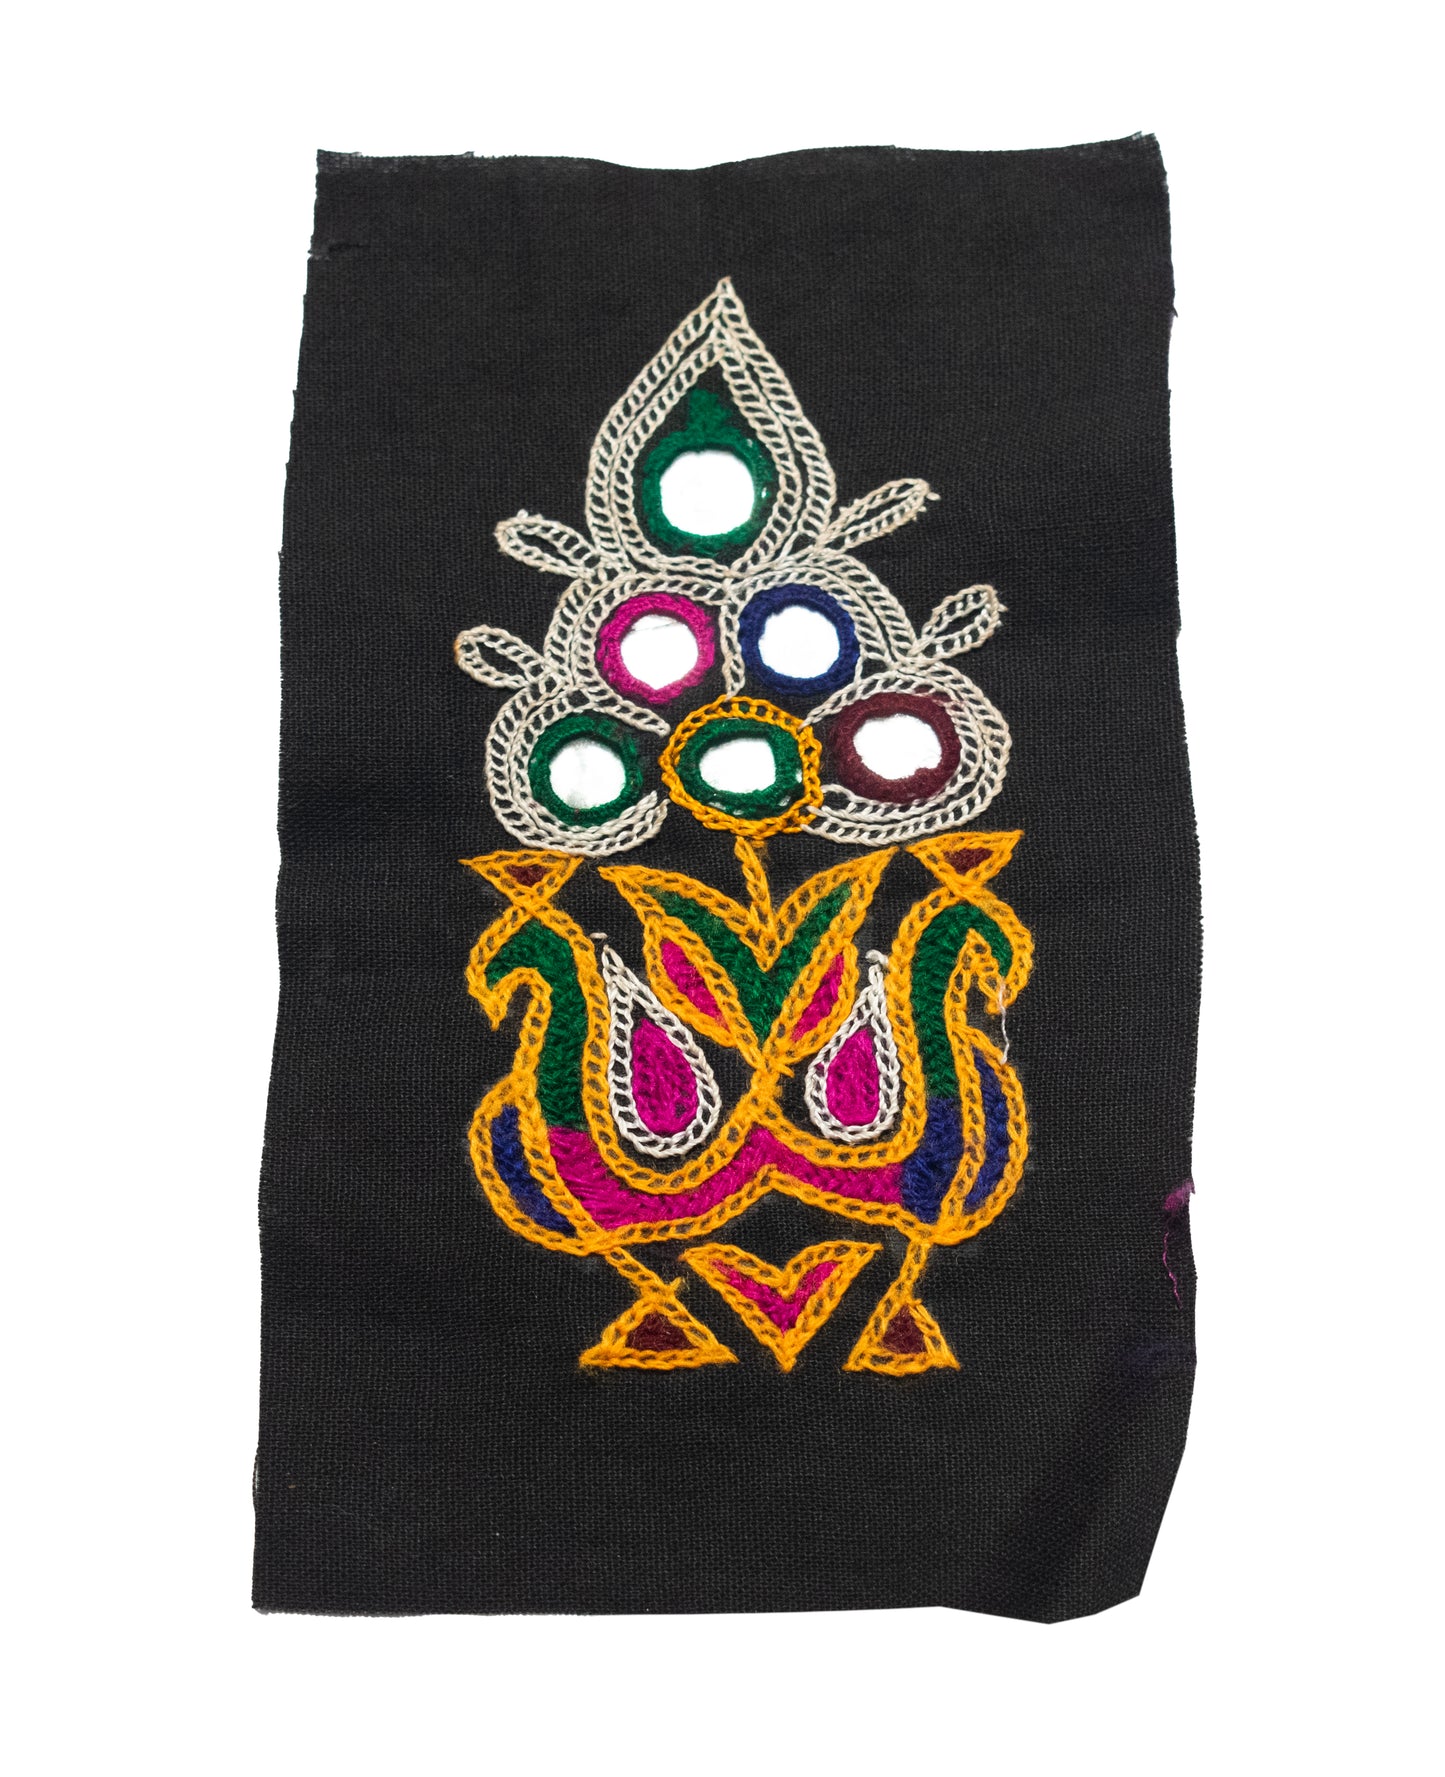 Ahir Work Embroidery Cotton Peacock Design Patch Handwork Patch